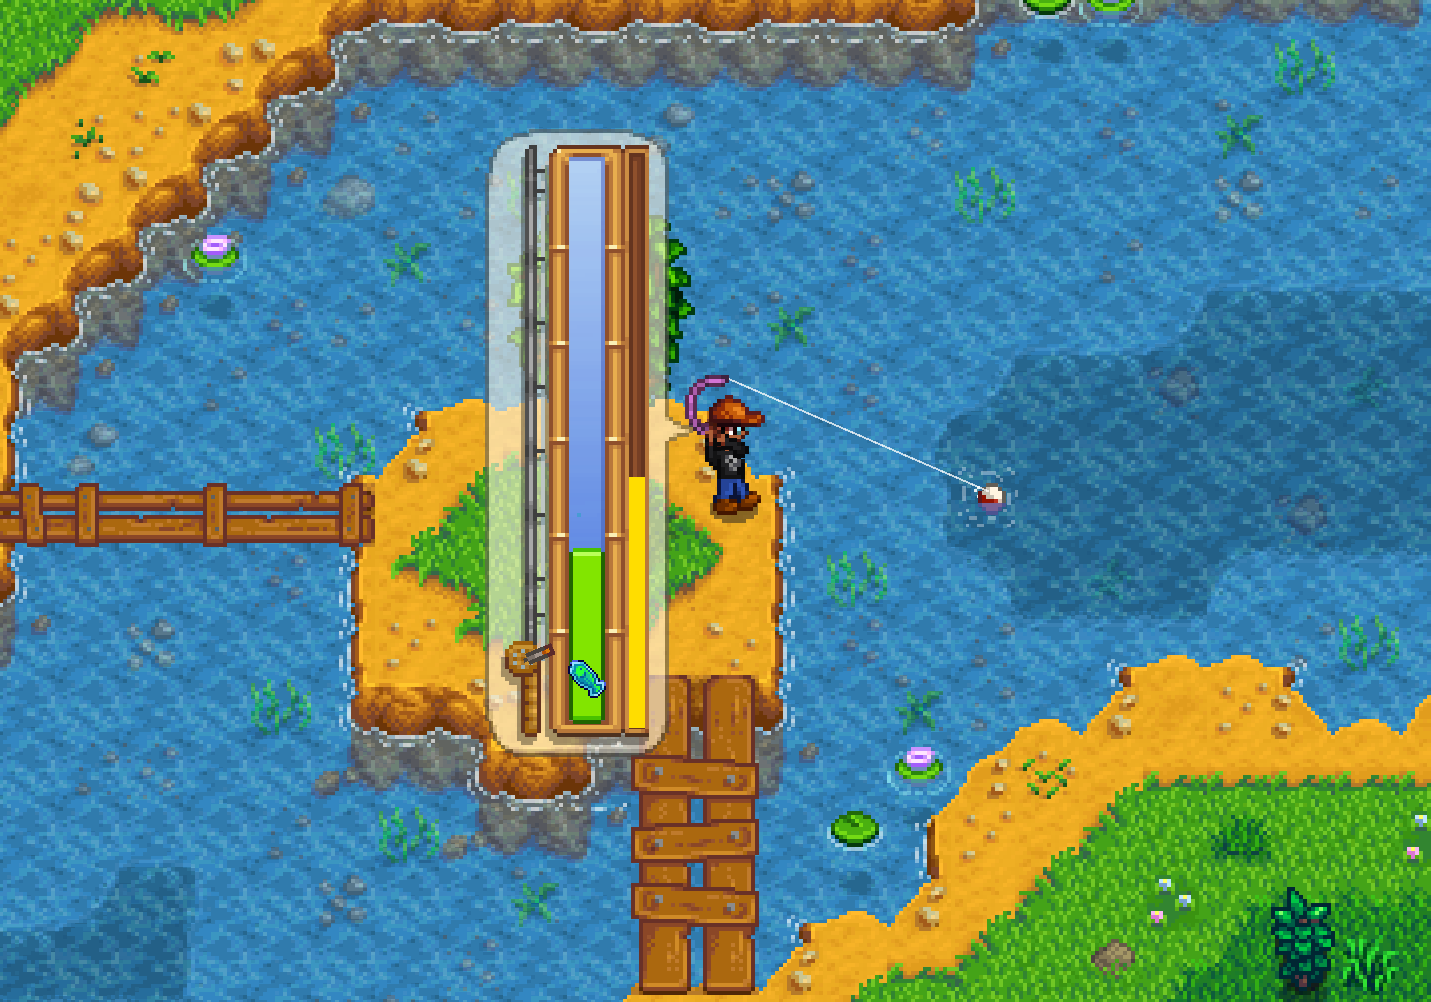 stardew valley fishing guide switch